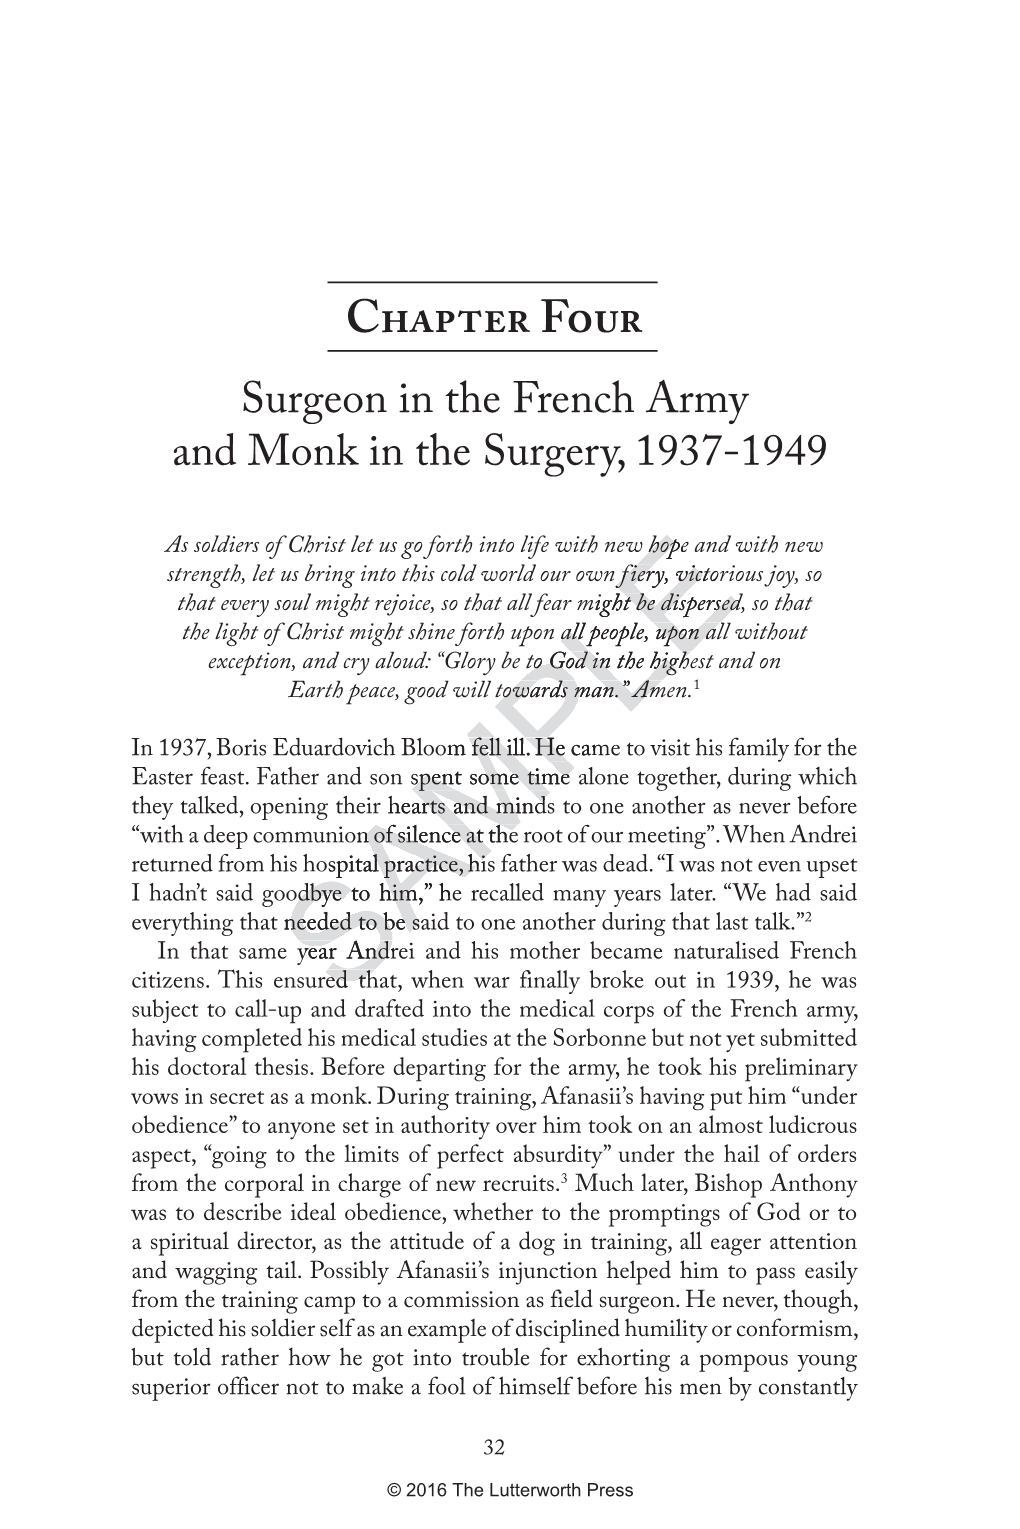 Surgeon in the French Army and Monk in the Surgery, 1937-1949